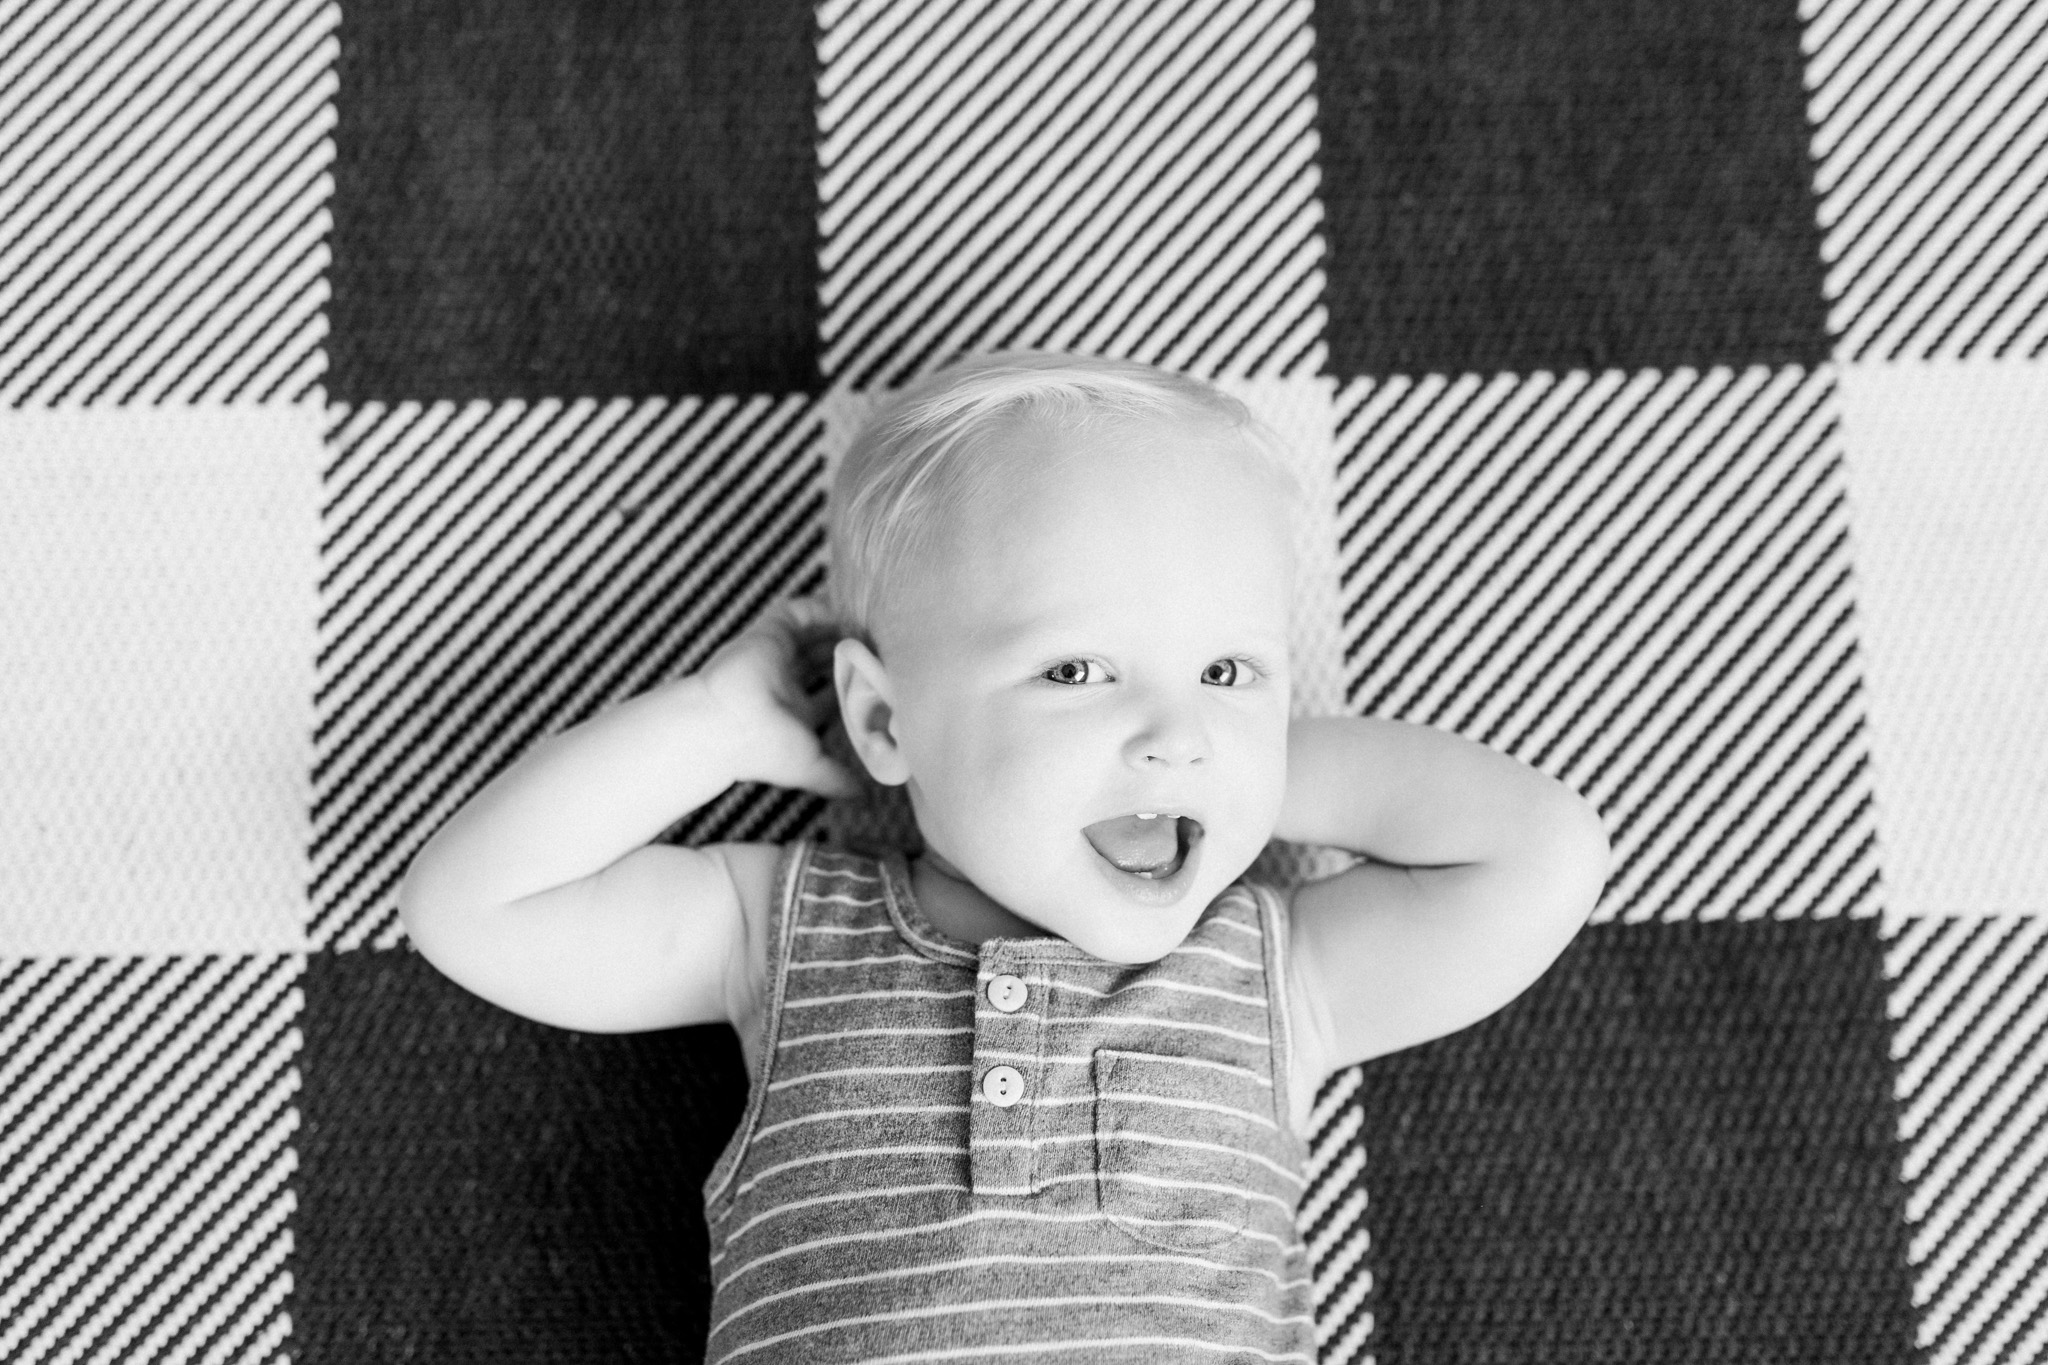 Baby Boy One Year Milestone Session | Natural Light Studio | West Michigan Lifestyle Photography